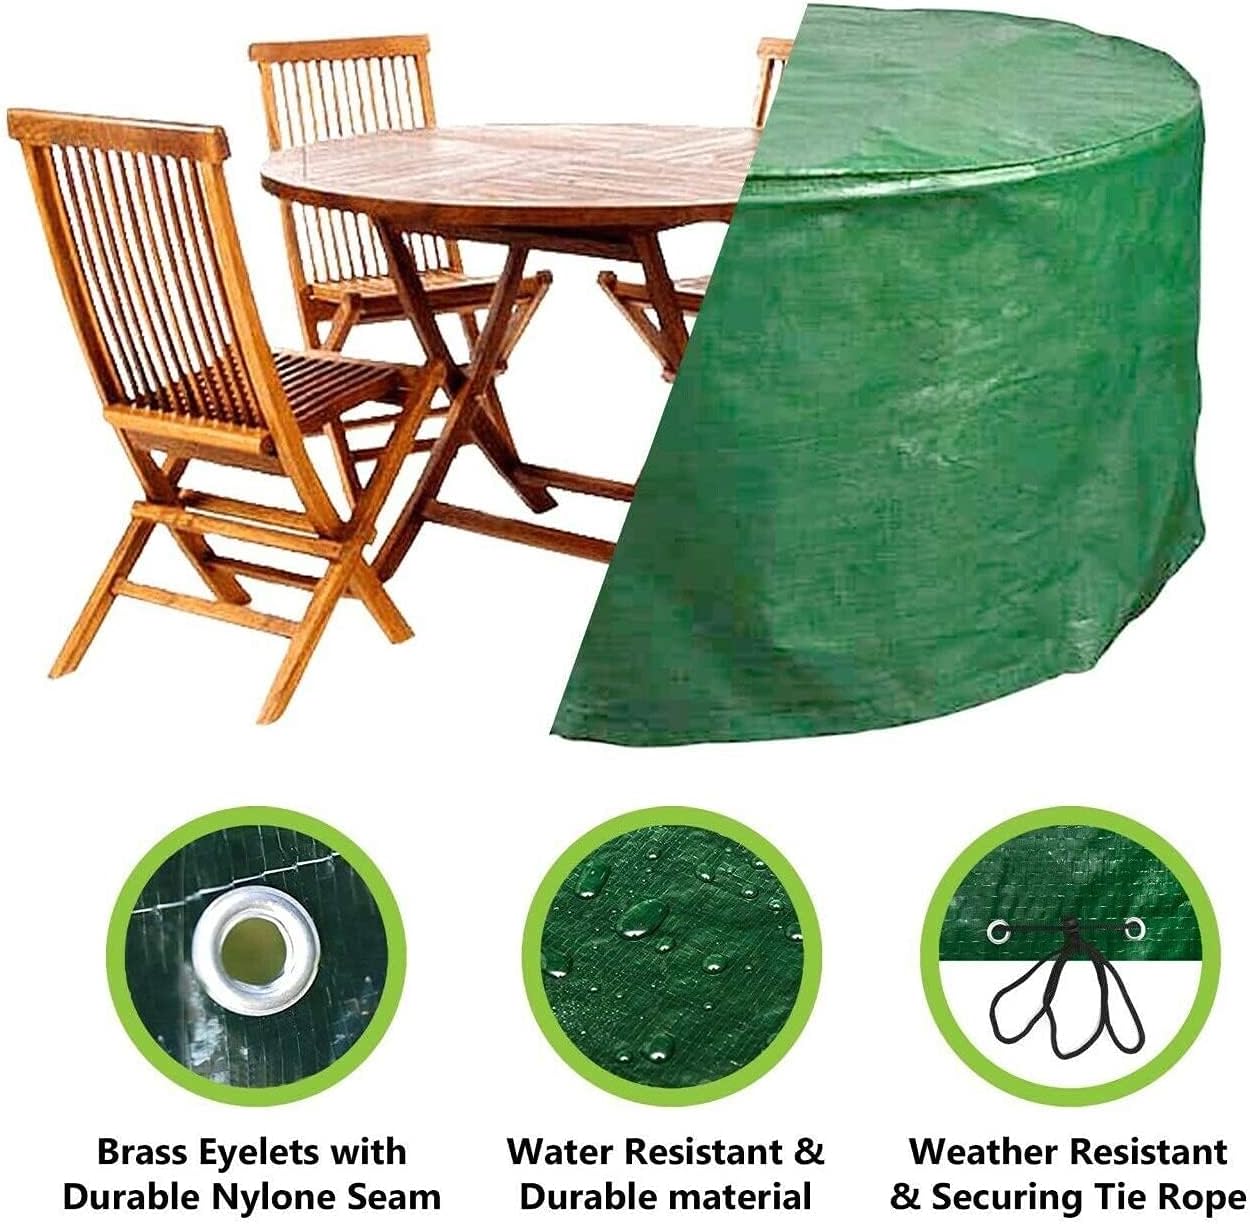 ADEPTNA Heavy Duty LARGE Round Patio Furniture Table Chairs Cover – Protects your Table and Chairs All Year Round from the Weather Dirt and Grime (140CM X 94CM)